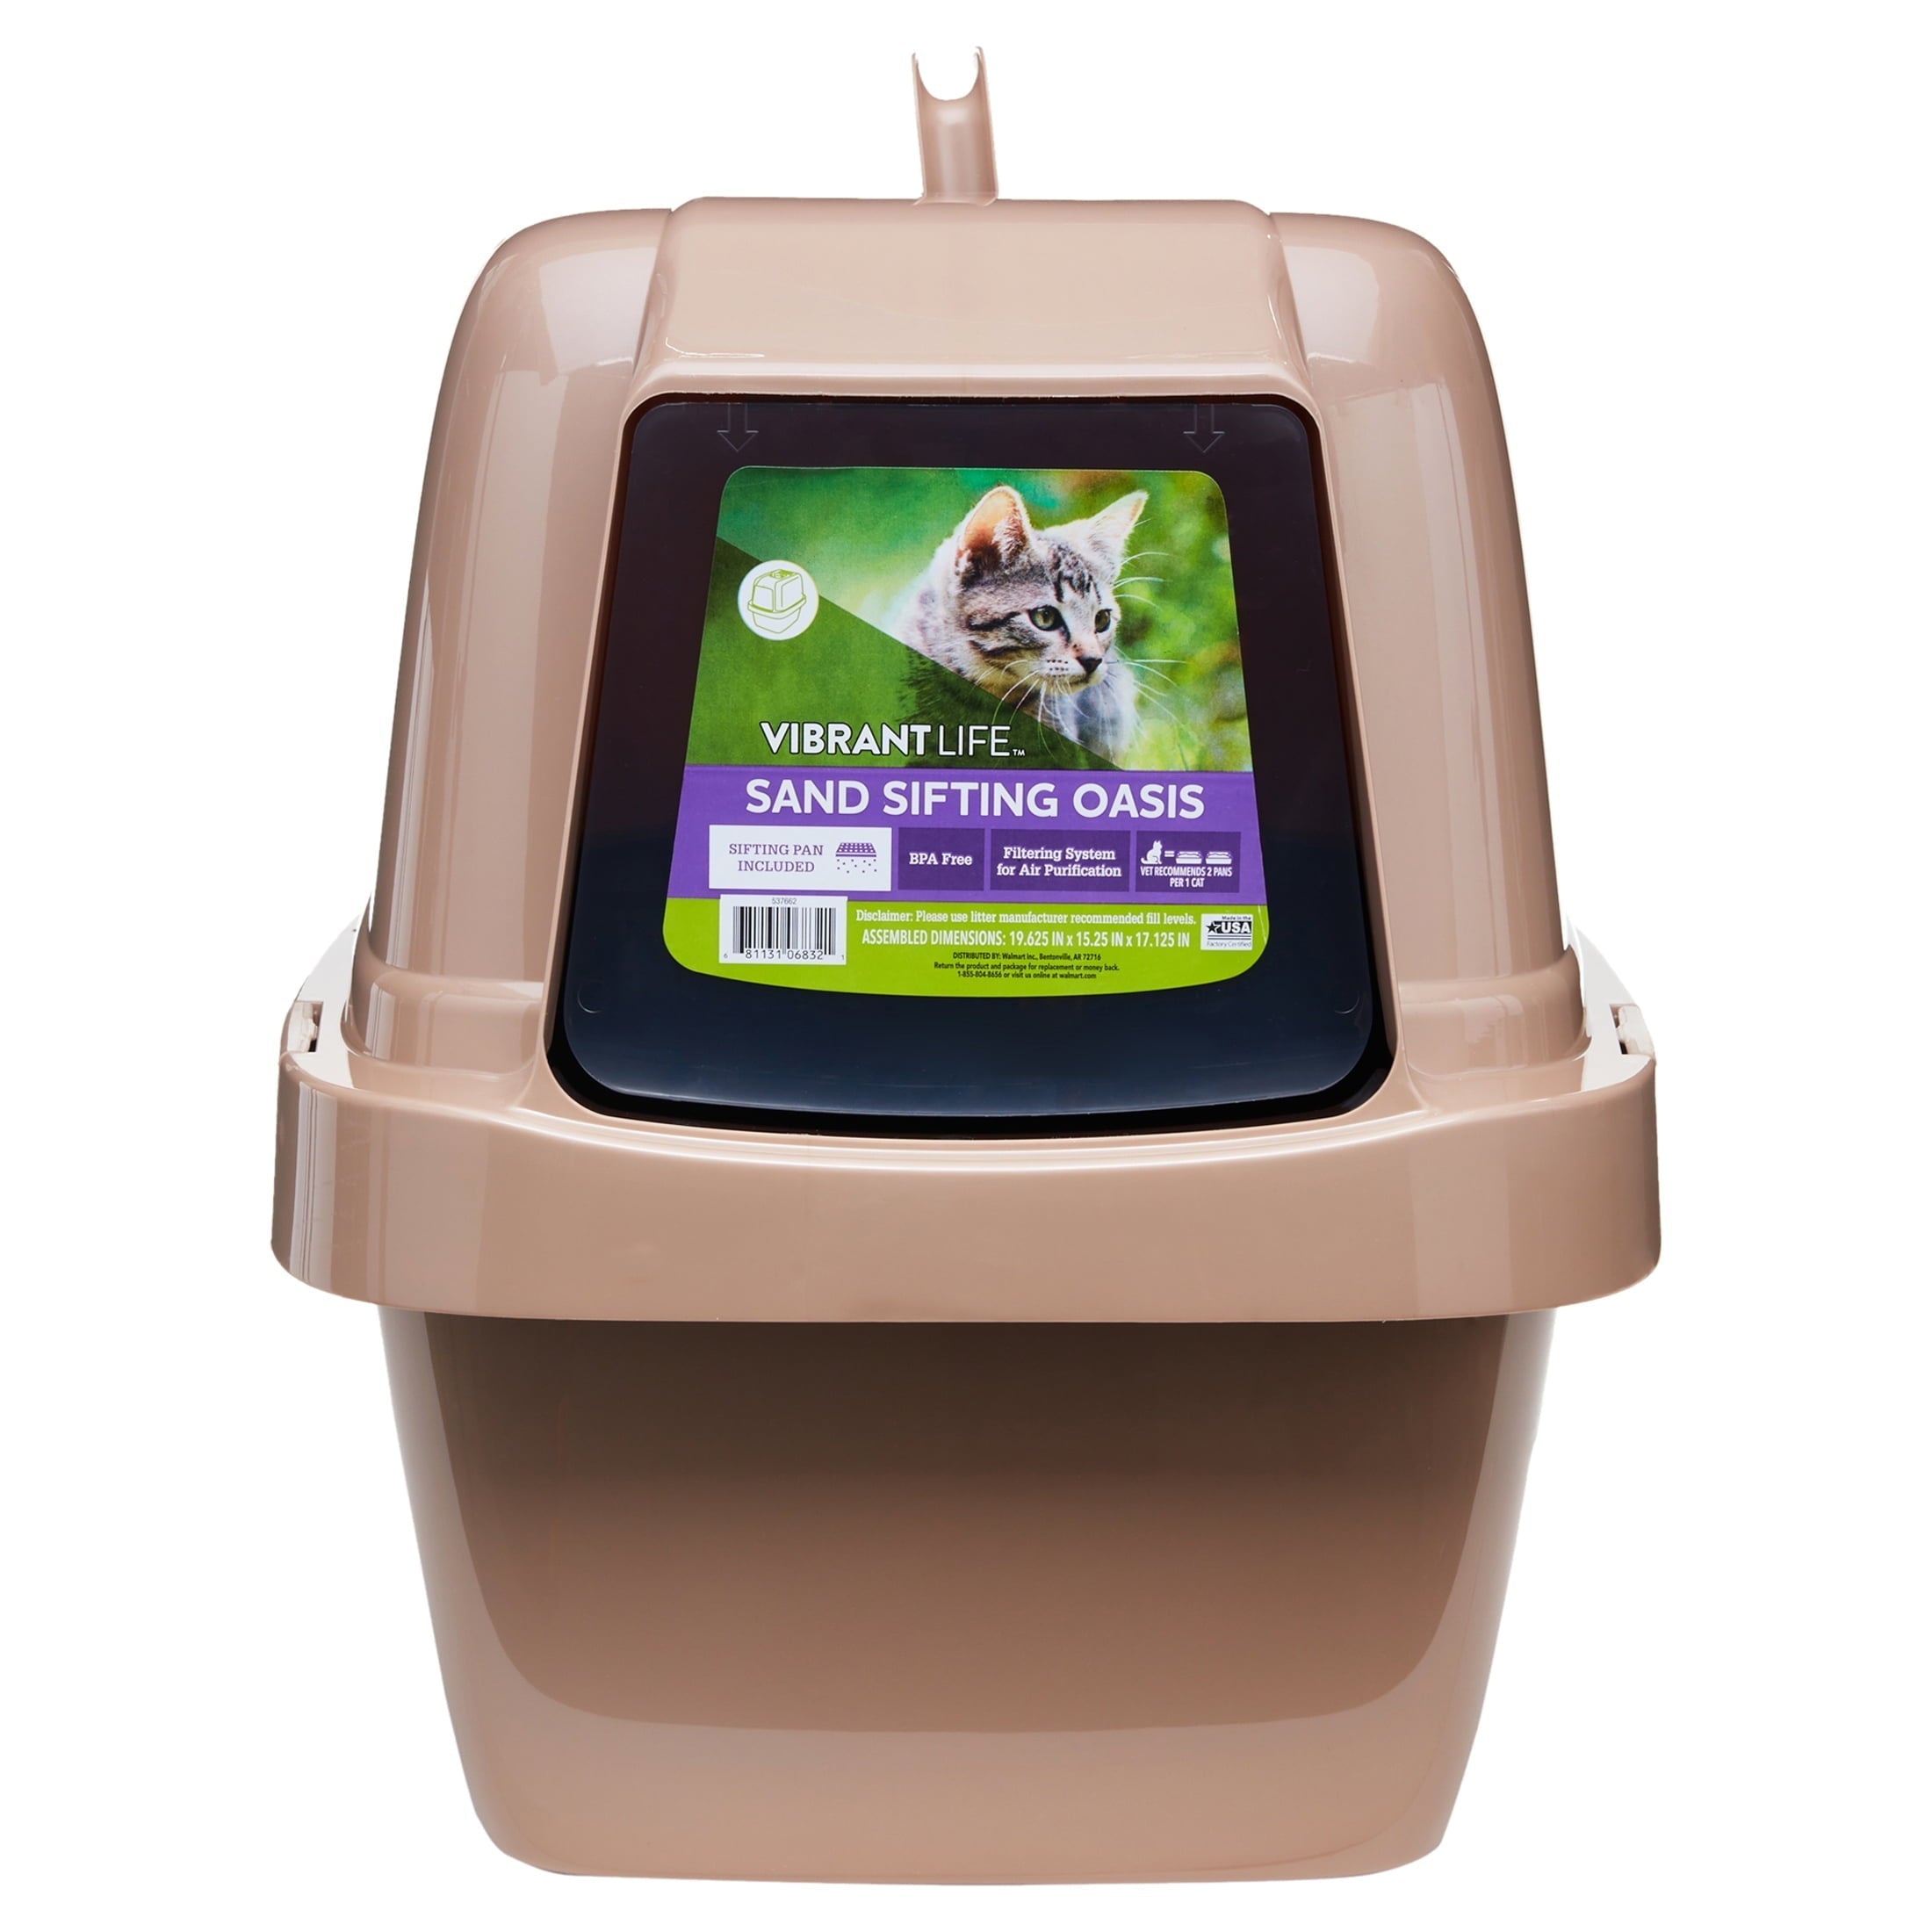 Wholesale prices with free shipping all over United States Vibrant Life Sand Sifting Oasis Cat Litter Box, Beige - Steven Deals